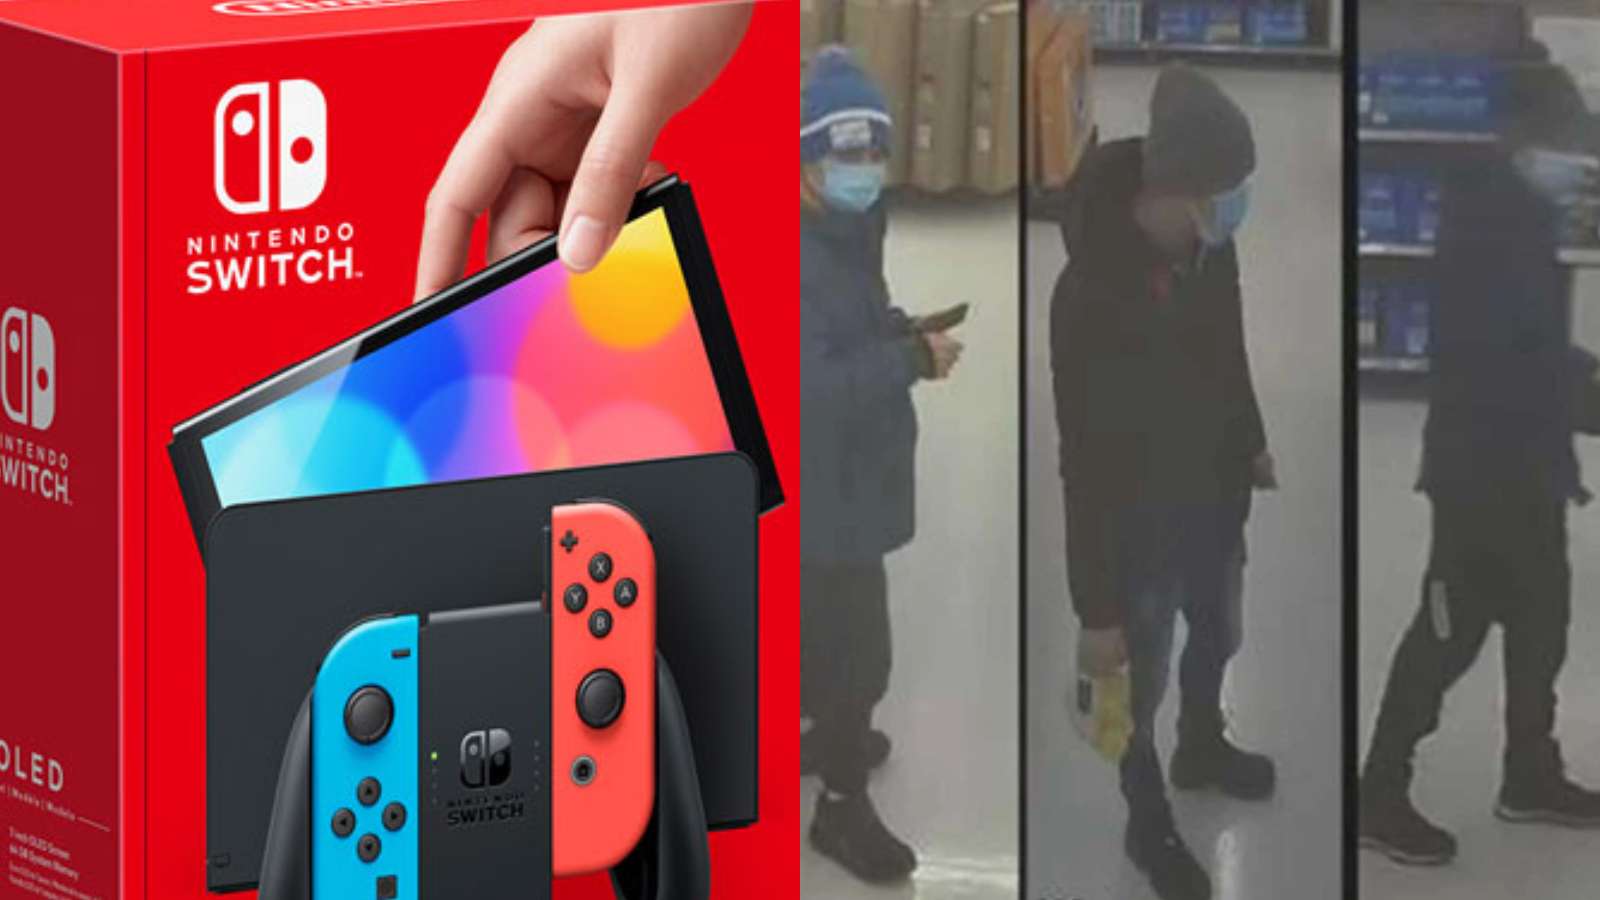 thieves steal 10K of nintendo switch consoles